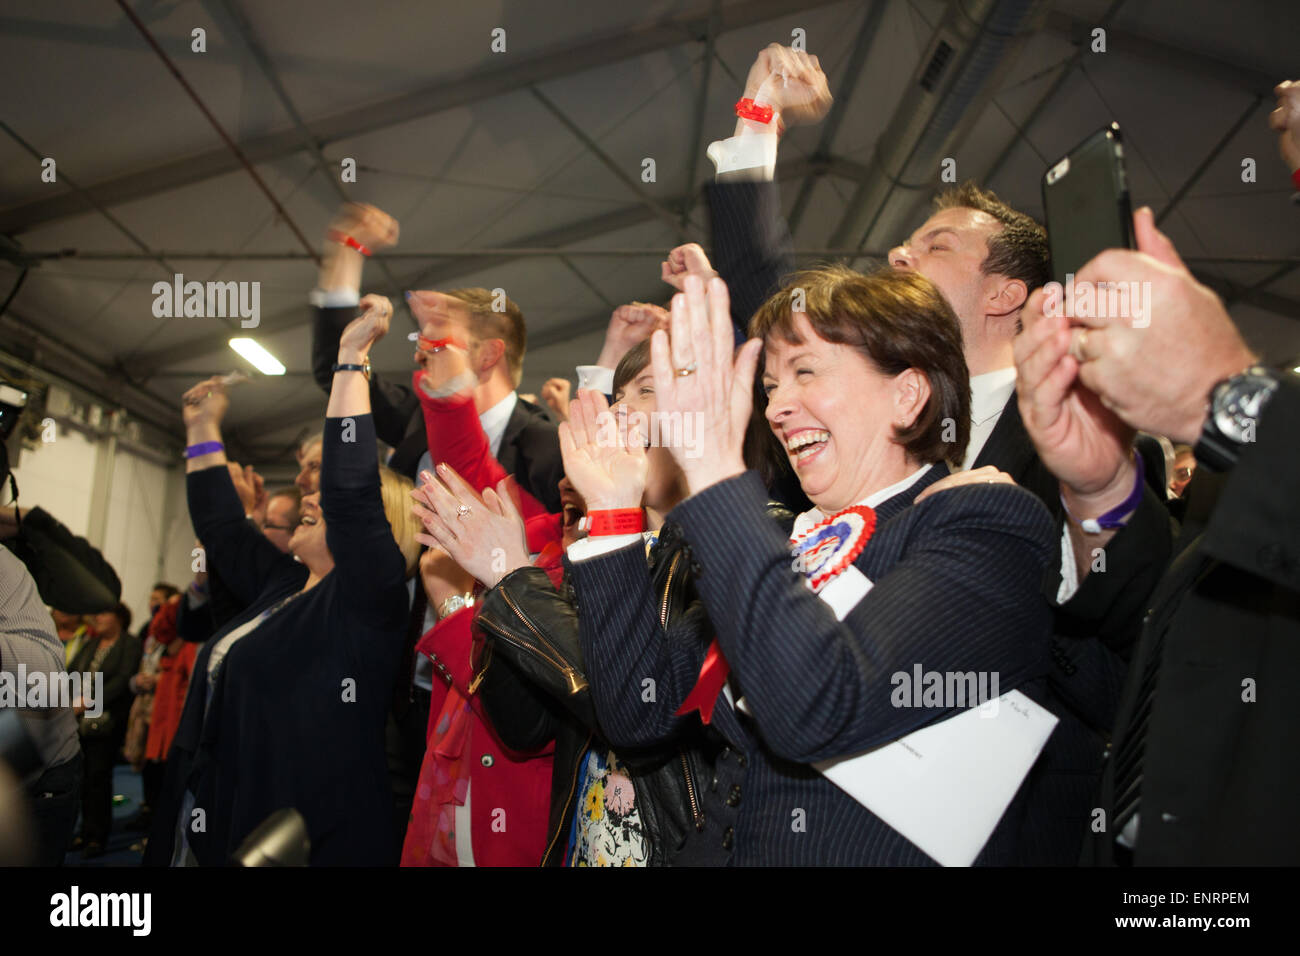 Belfast UK. 7th May 2015 General Election:  Diane Dodds  celebrating after husband Nigel wins the Seat for Belfast North in the Stock Photo